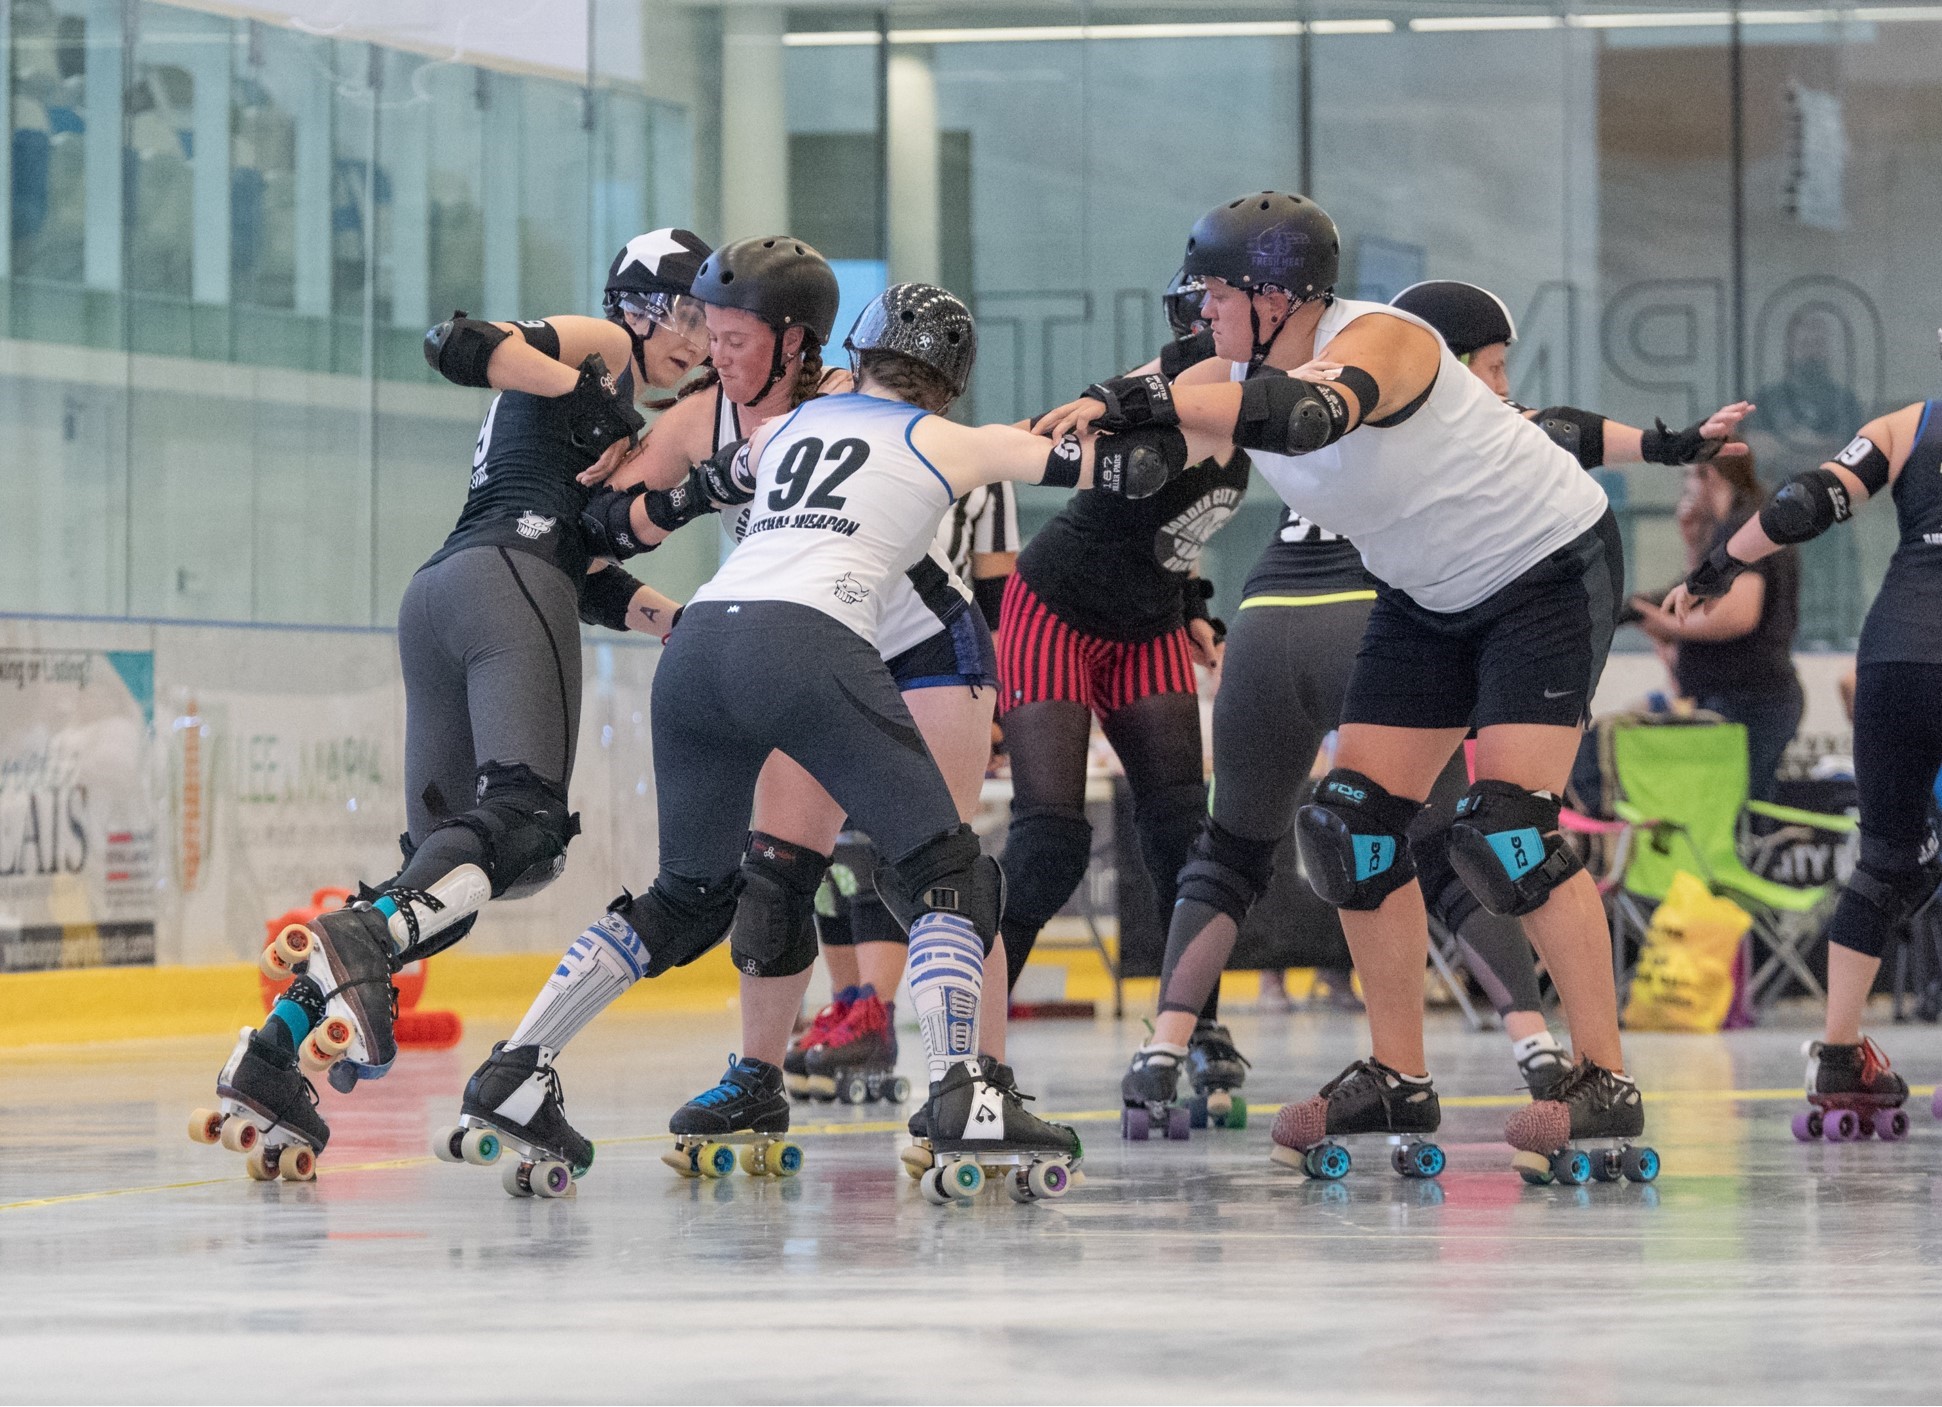 Guest Post: Reasons to Join Roller Derby